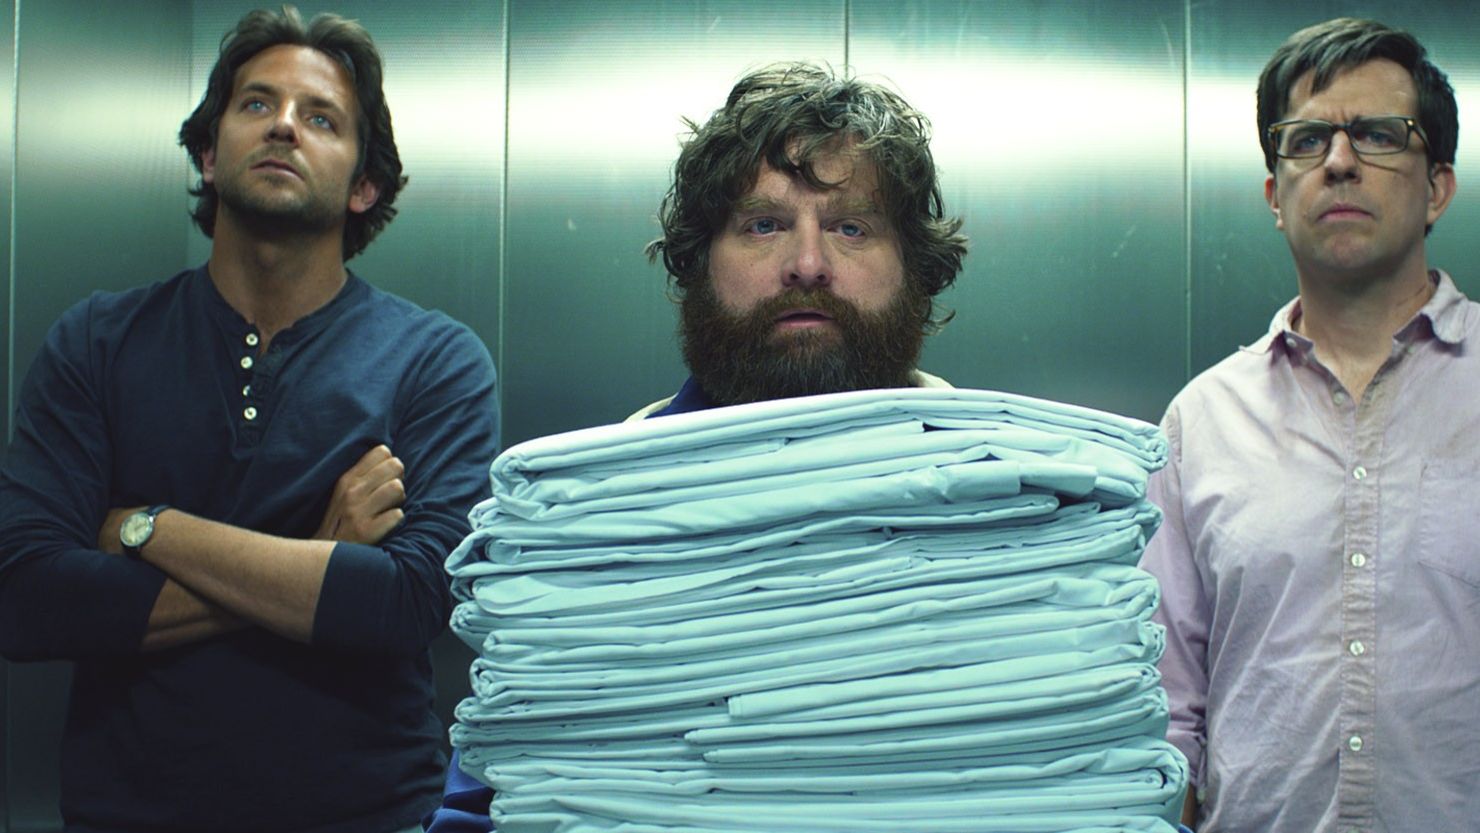 Bradley Cooper, Zach Galifianakis and Ed Helms star in "The Hangover Part III."